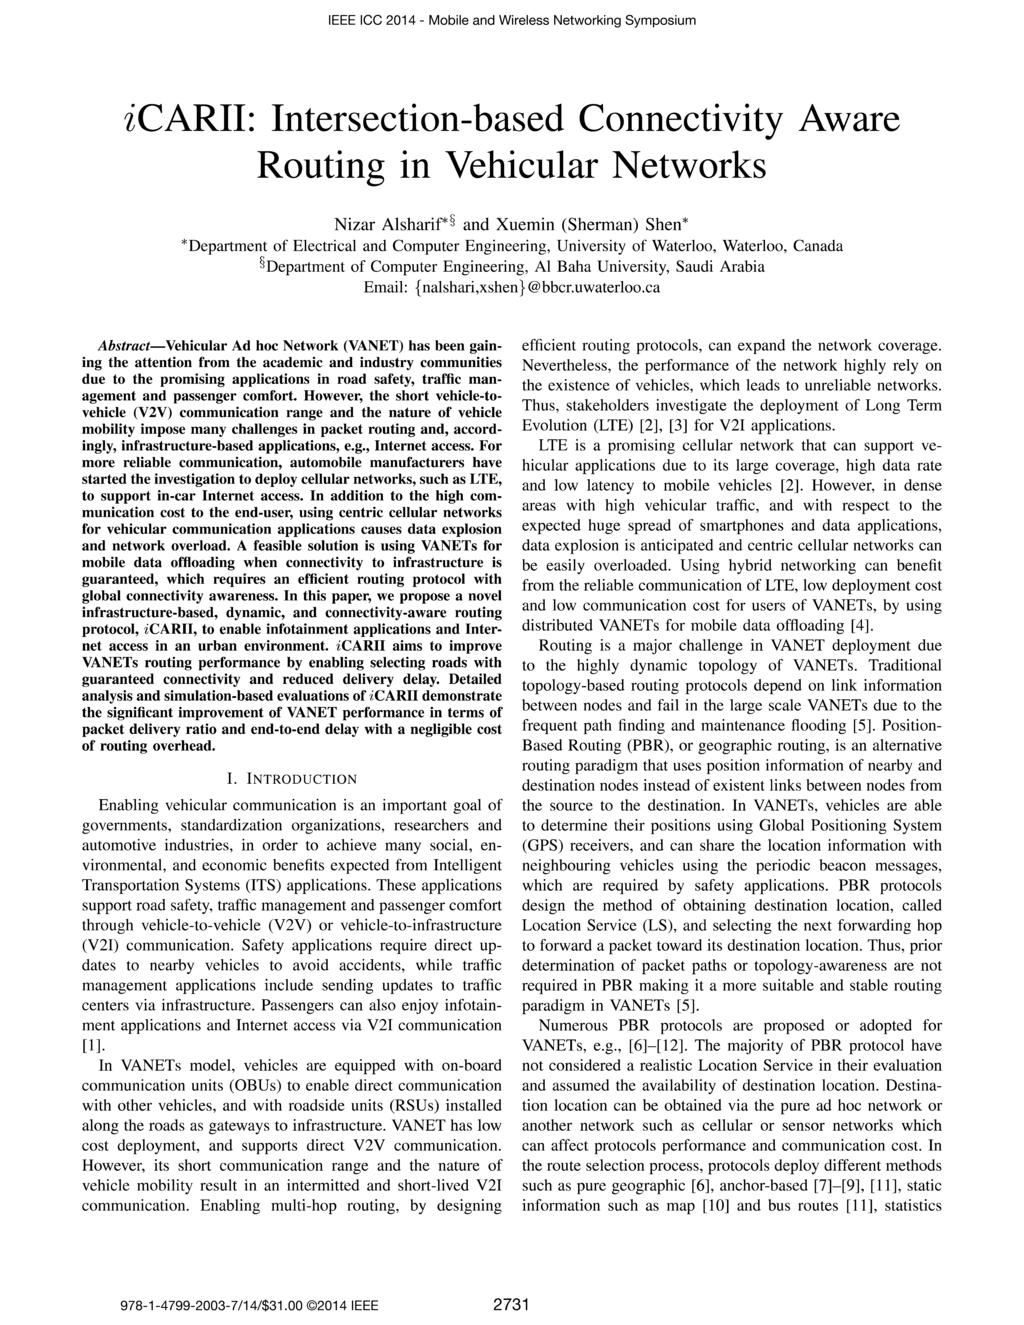 icarii: Intersection-based Connectivity Aware Routing in Vehicular Networks Nizar Alsharif* and Xuemin (Sherman) Shen* *Department of Electrical and Computer Engineering University of Waterloo